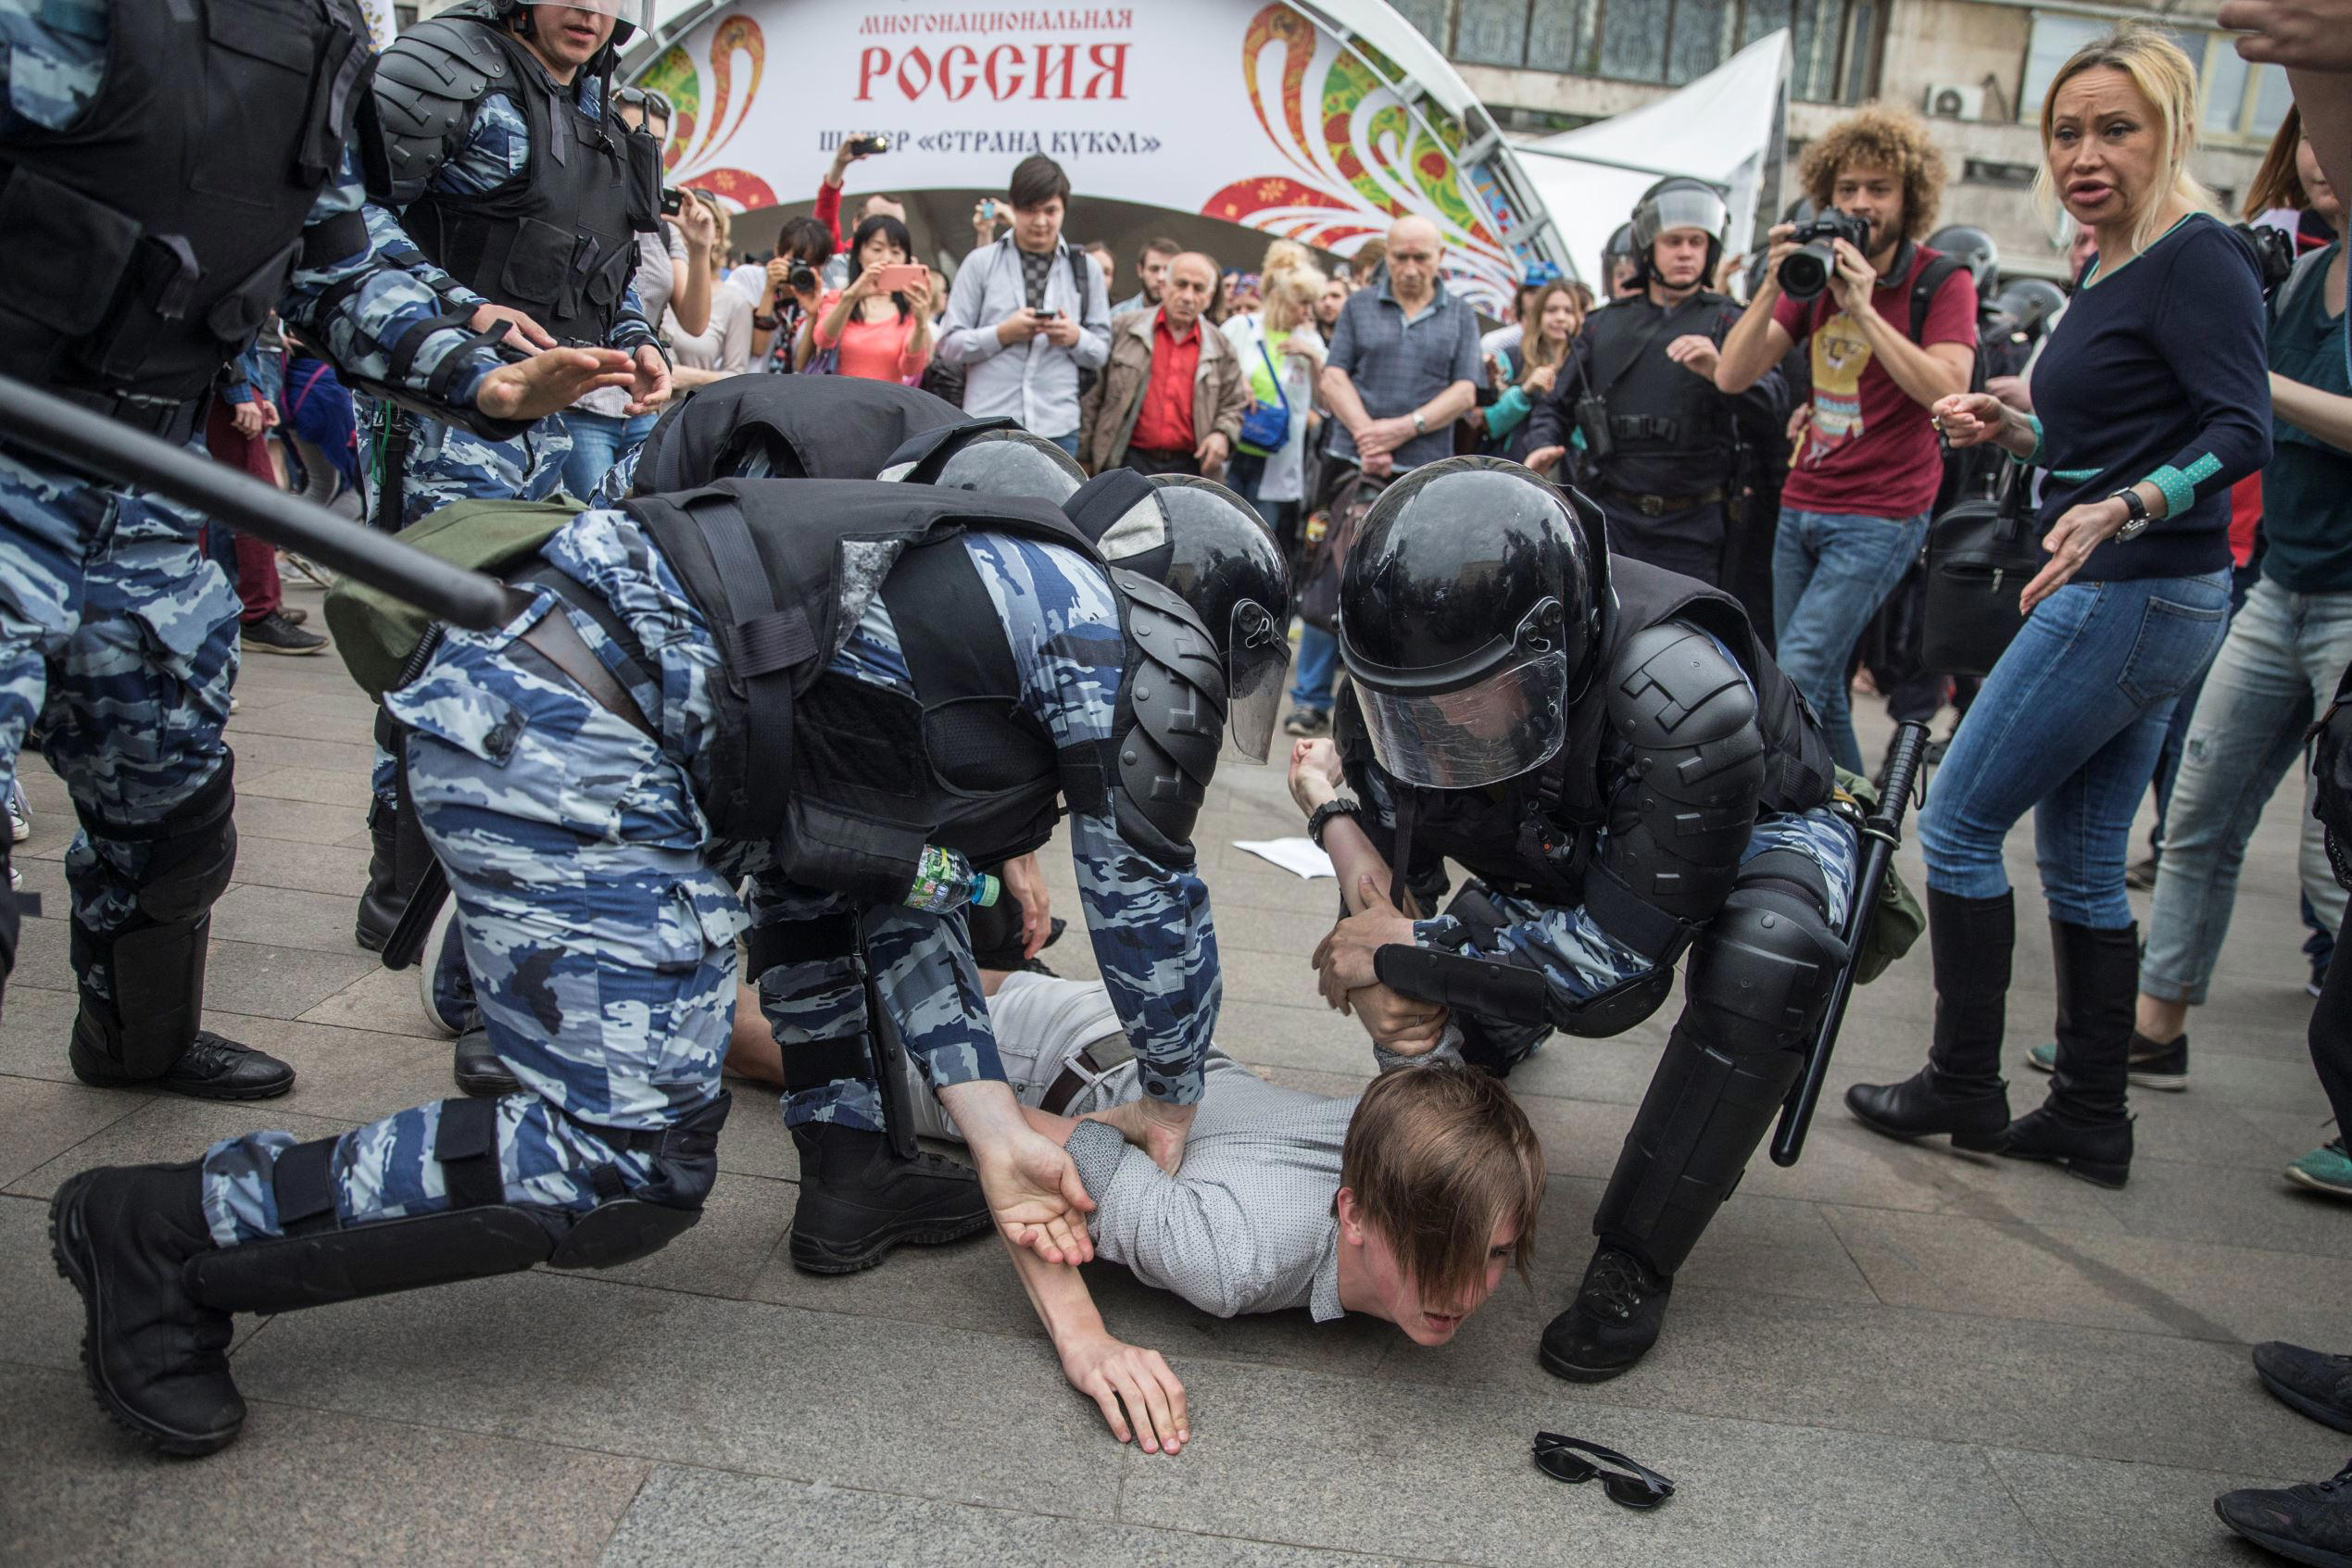 Slide 1 of 101: Police detain a protester In Moscow, Russia, Monday, June 12, 2017. Demonstrators in Monday's opposition protests across Russia say they are fed up with endemic corruption among officials. The protest gatherings in cities from Far East Pacific ports to St. Petersburg were spearheaded by Alexei Navalny, the anti-corruption campaigner who has become the Kremlin's most visible opponent. (Evgeny Feldman/Pool Photo via AP)